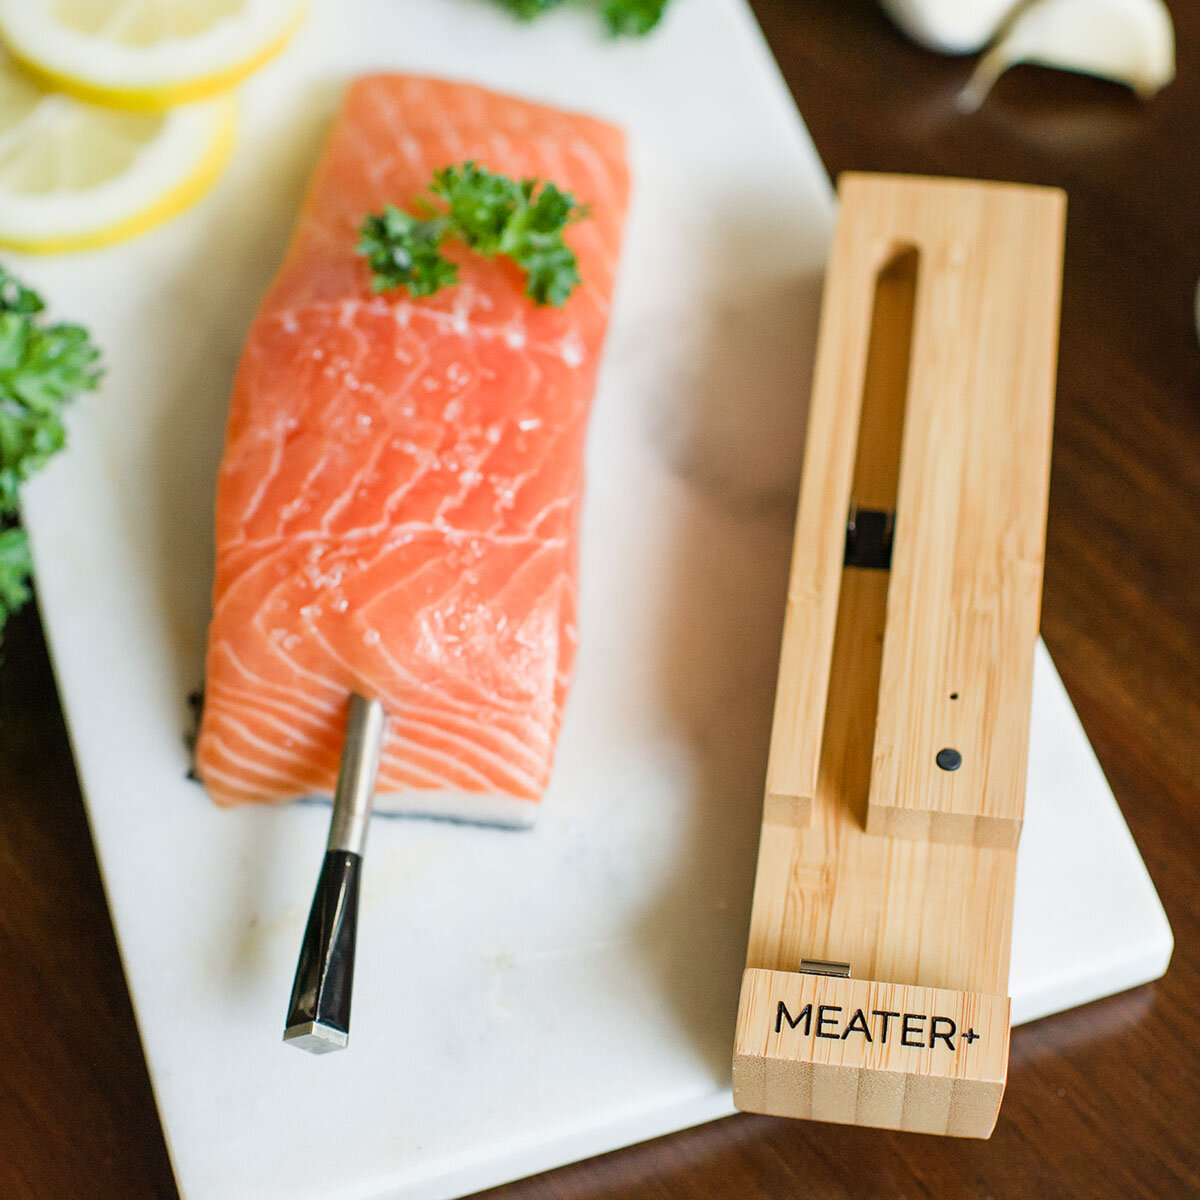 Meater Thermometer with raw salmon